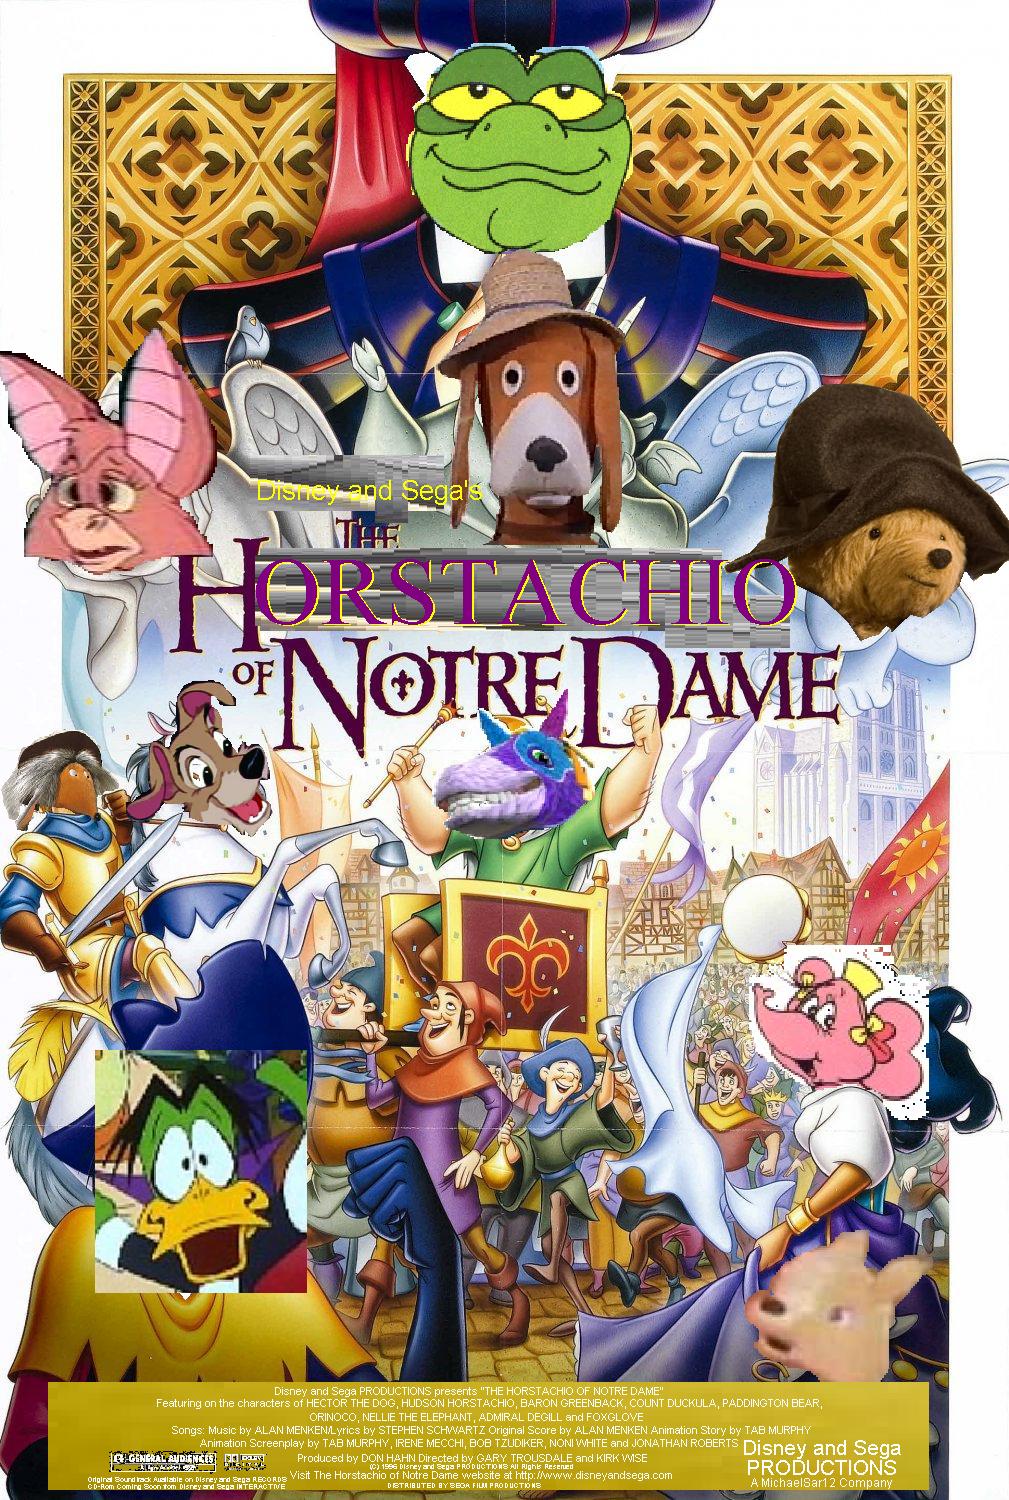 Category:The Hunchback of Notre Dame Movie Spoofs | Scratchpad II Wiki